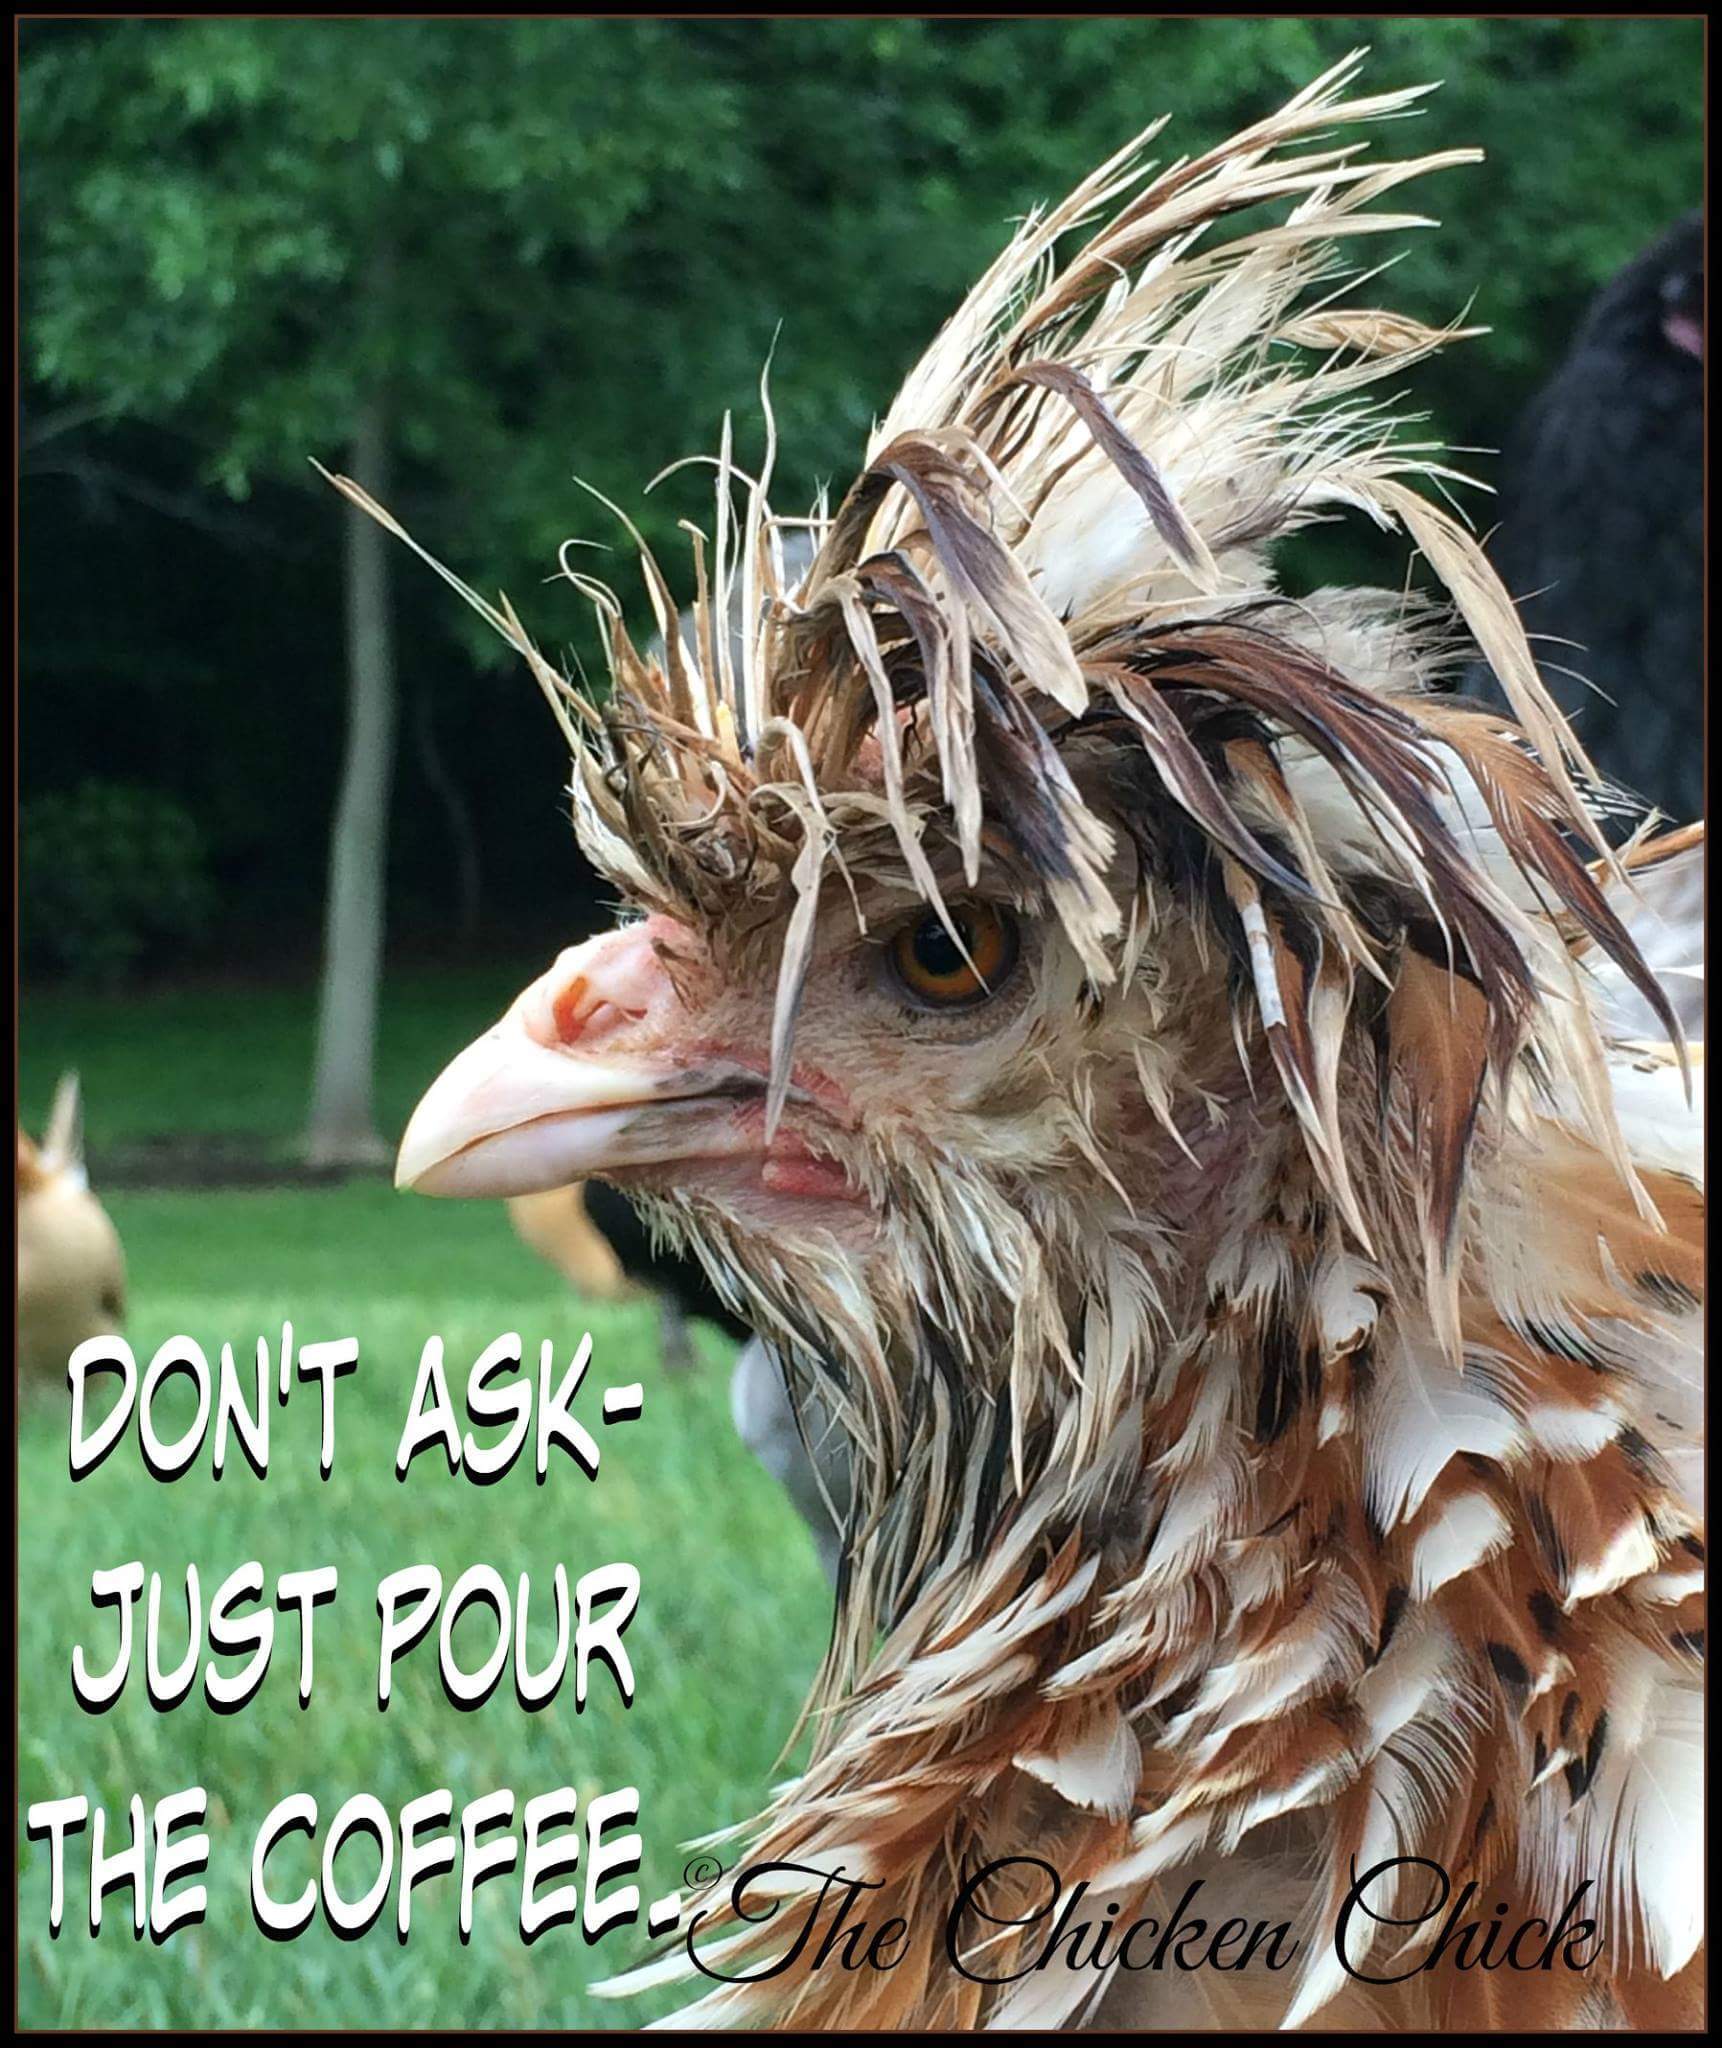 Coffee is the sweet nectar of the gods - meme